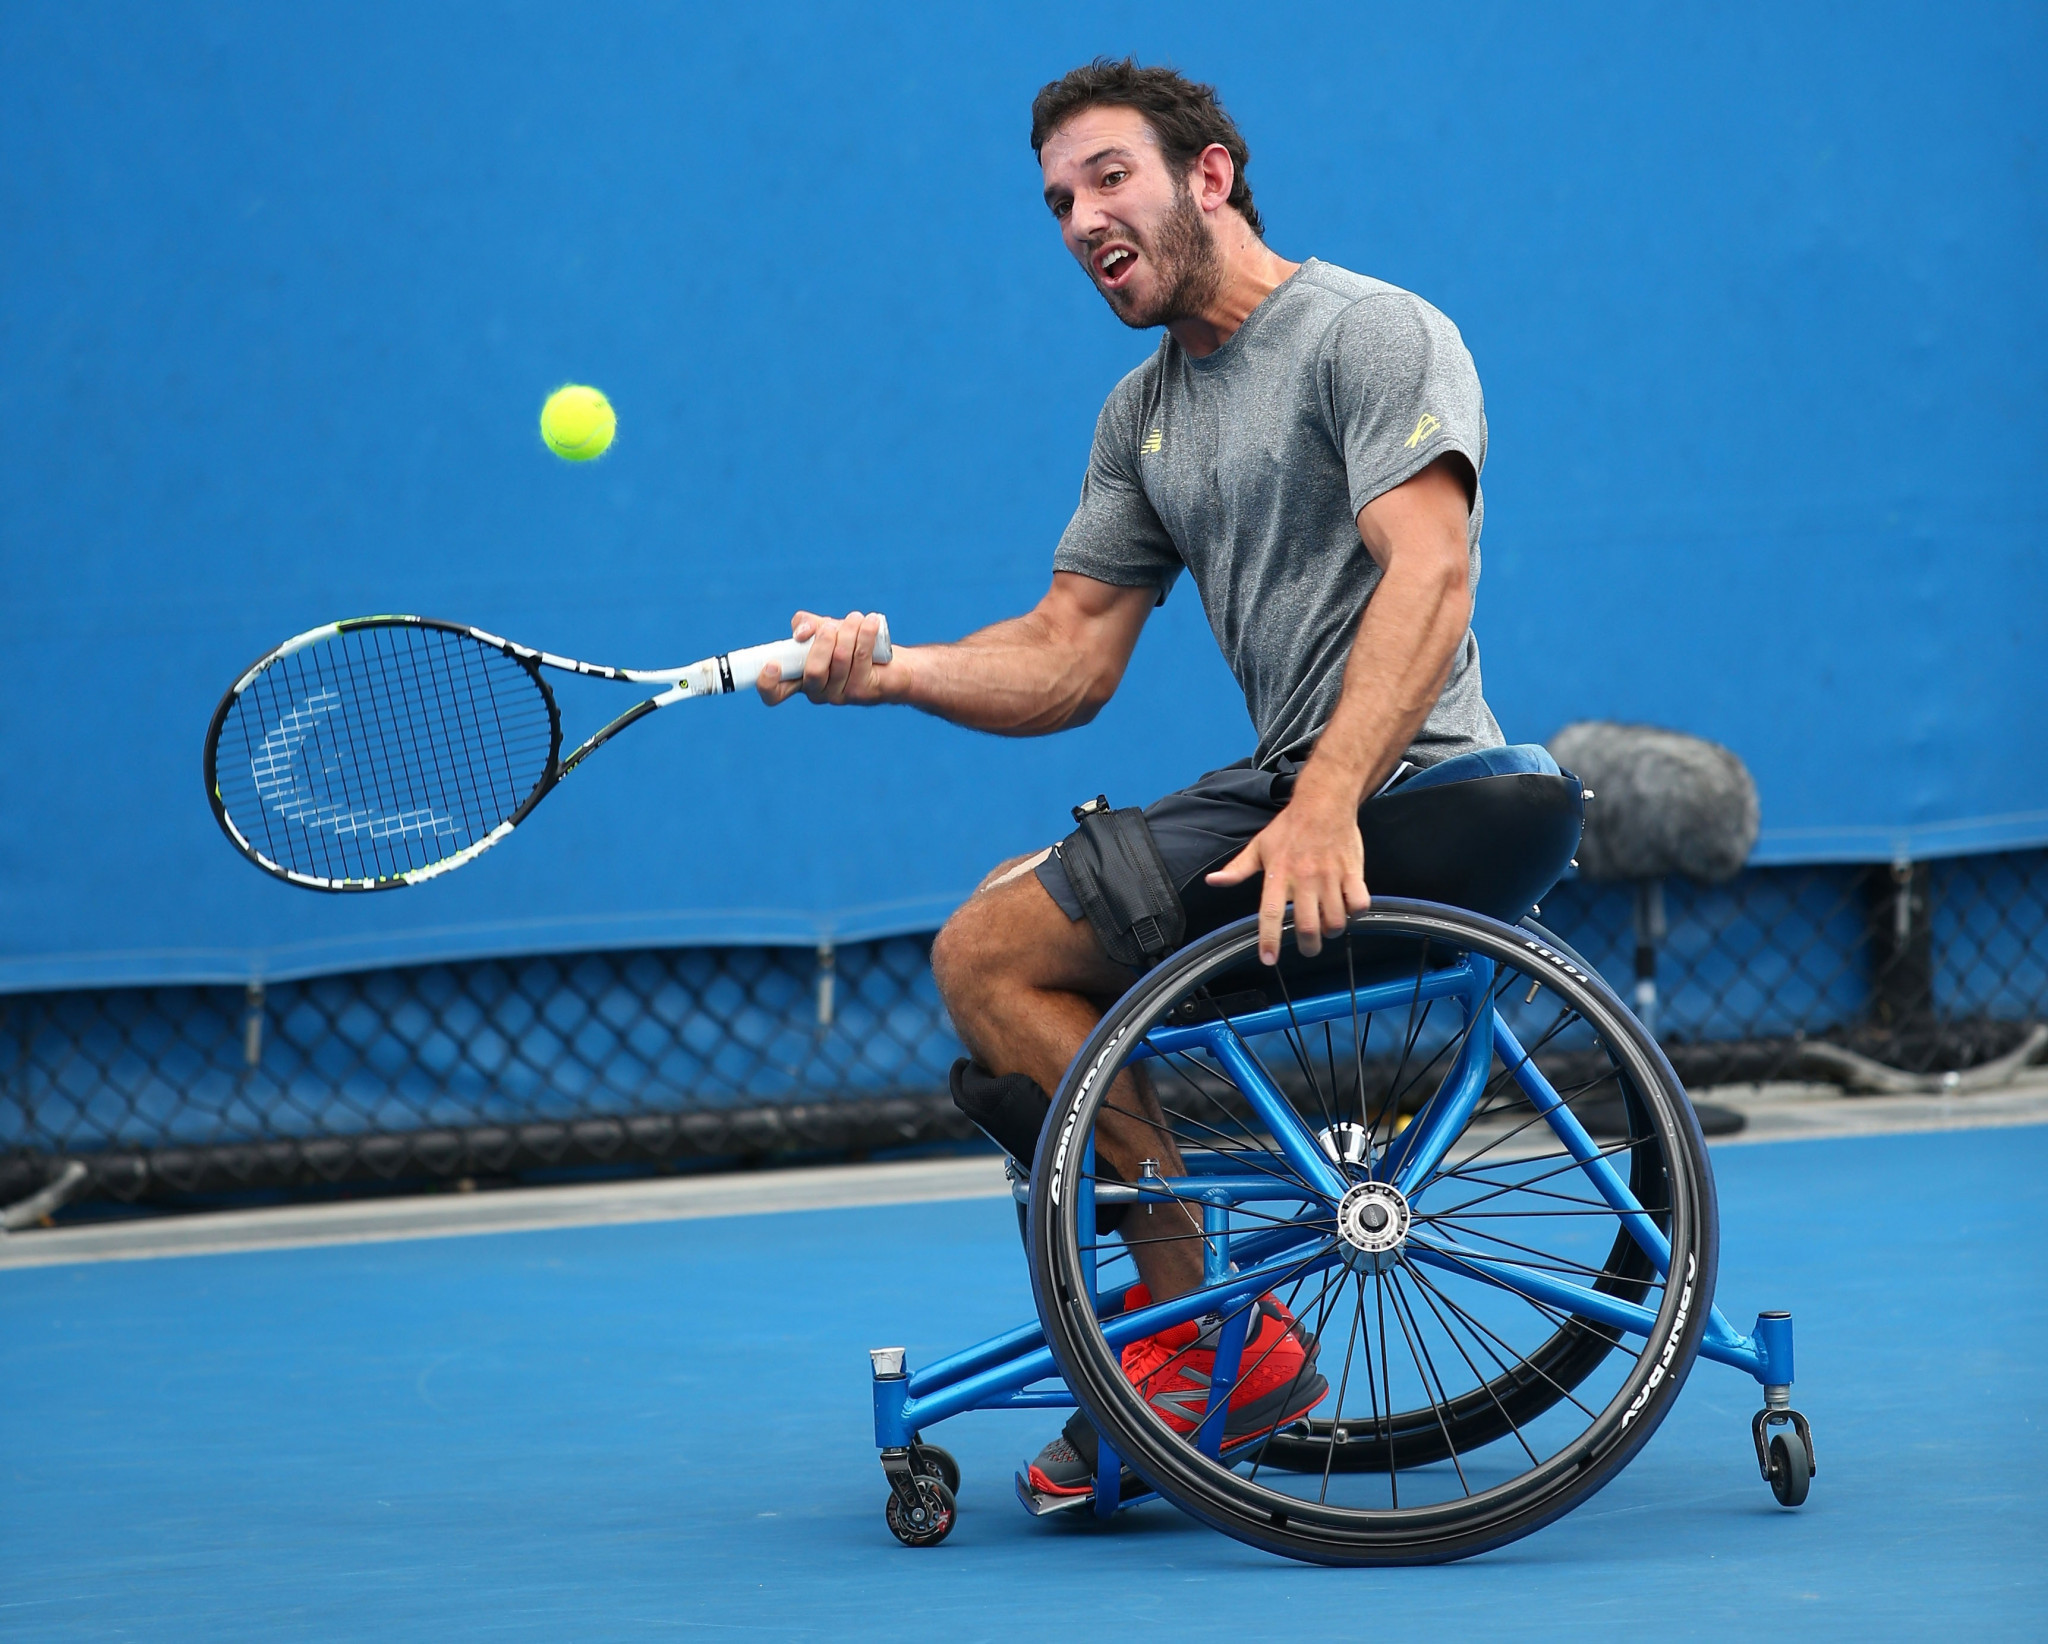 Adam Kellerman has been awarded a wildcard for the Australian Open men’s wheelchair tennis event with defending champion Gustavo Fernández also among the confirmed entries ©Getty Images